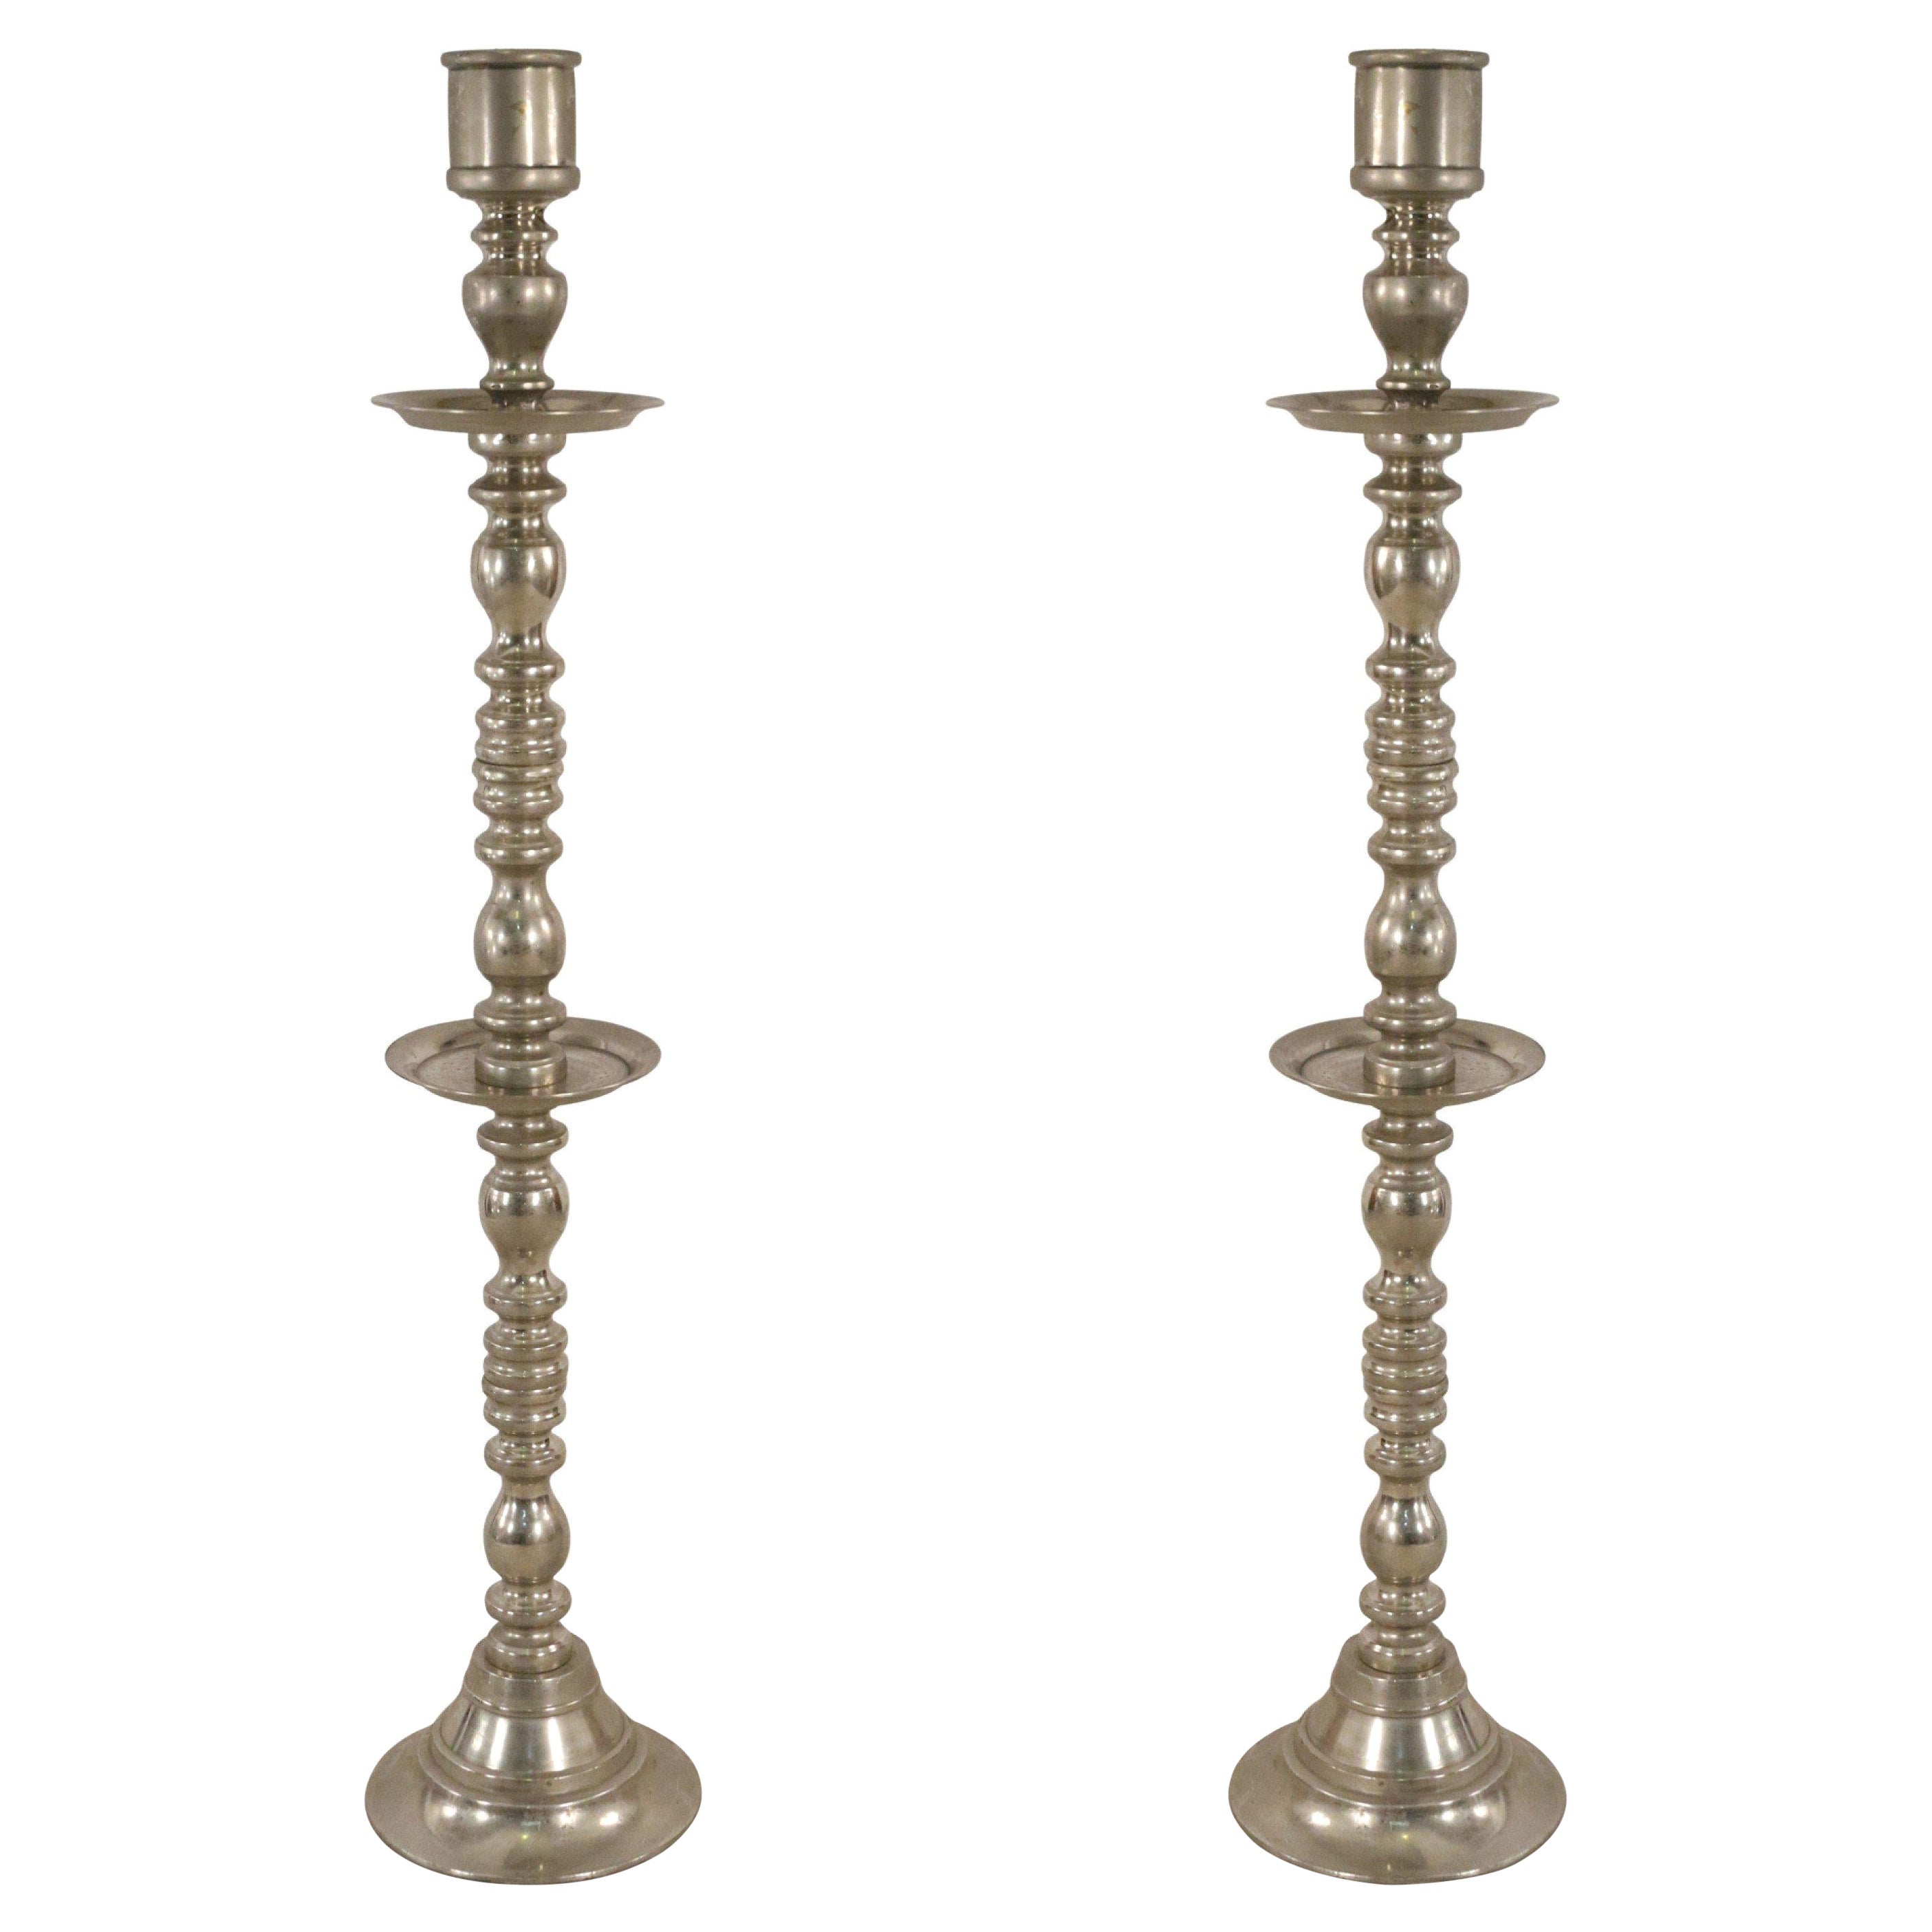 Pair of Mid-Century Silver Metal Turned Design Floor Torchiere/Candle Holders For Sale